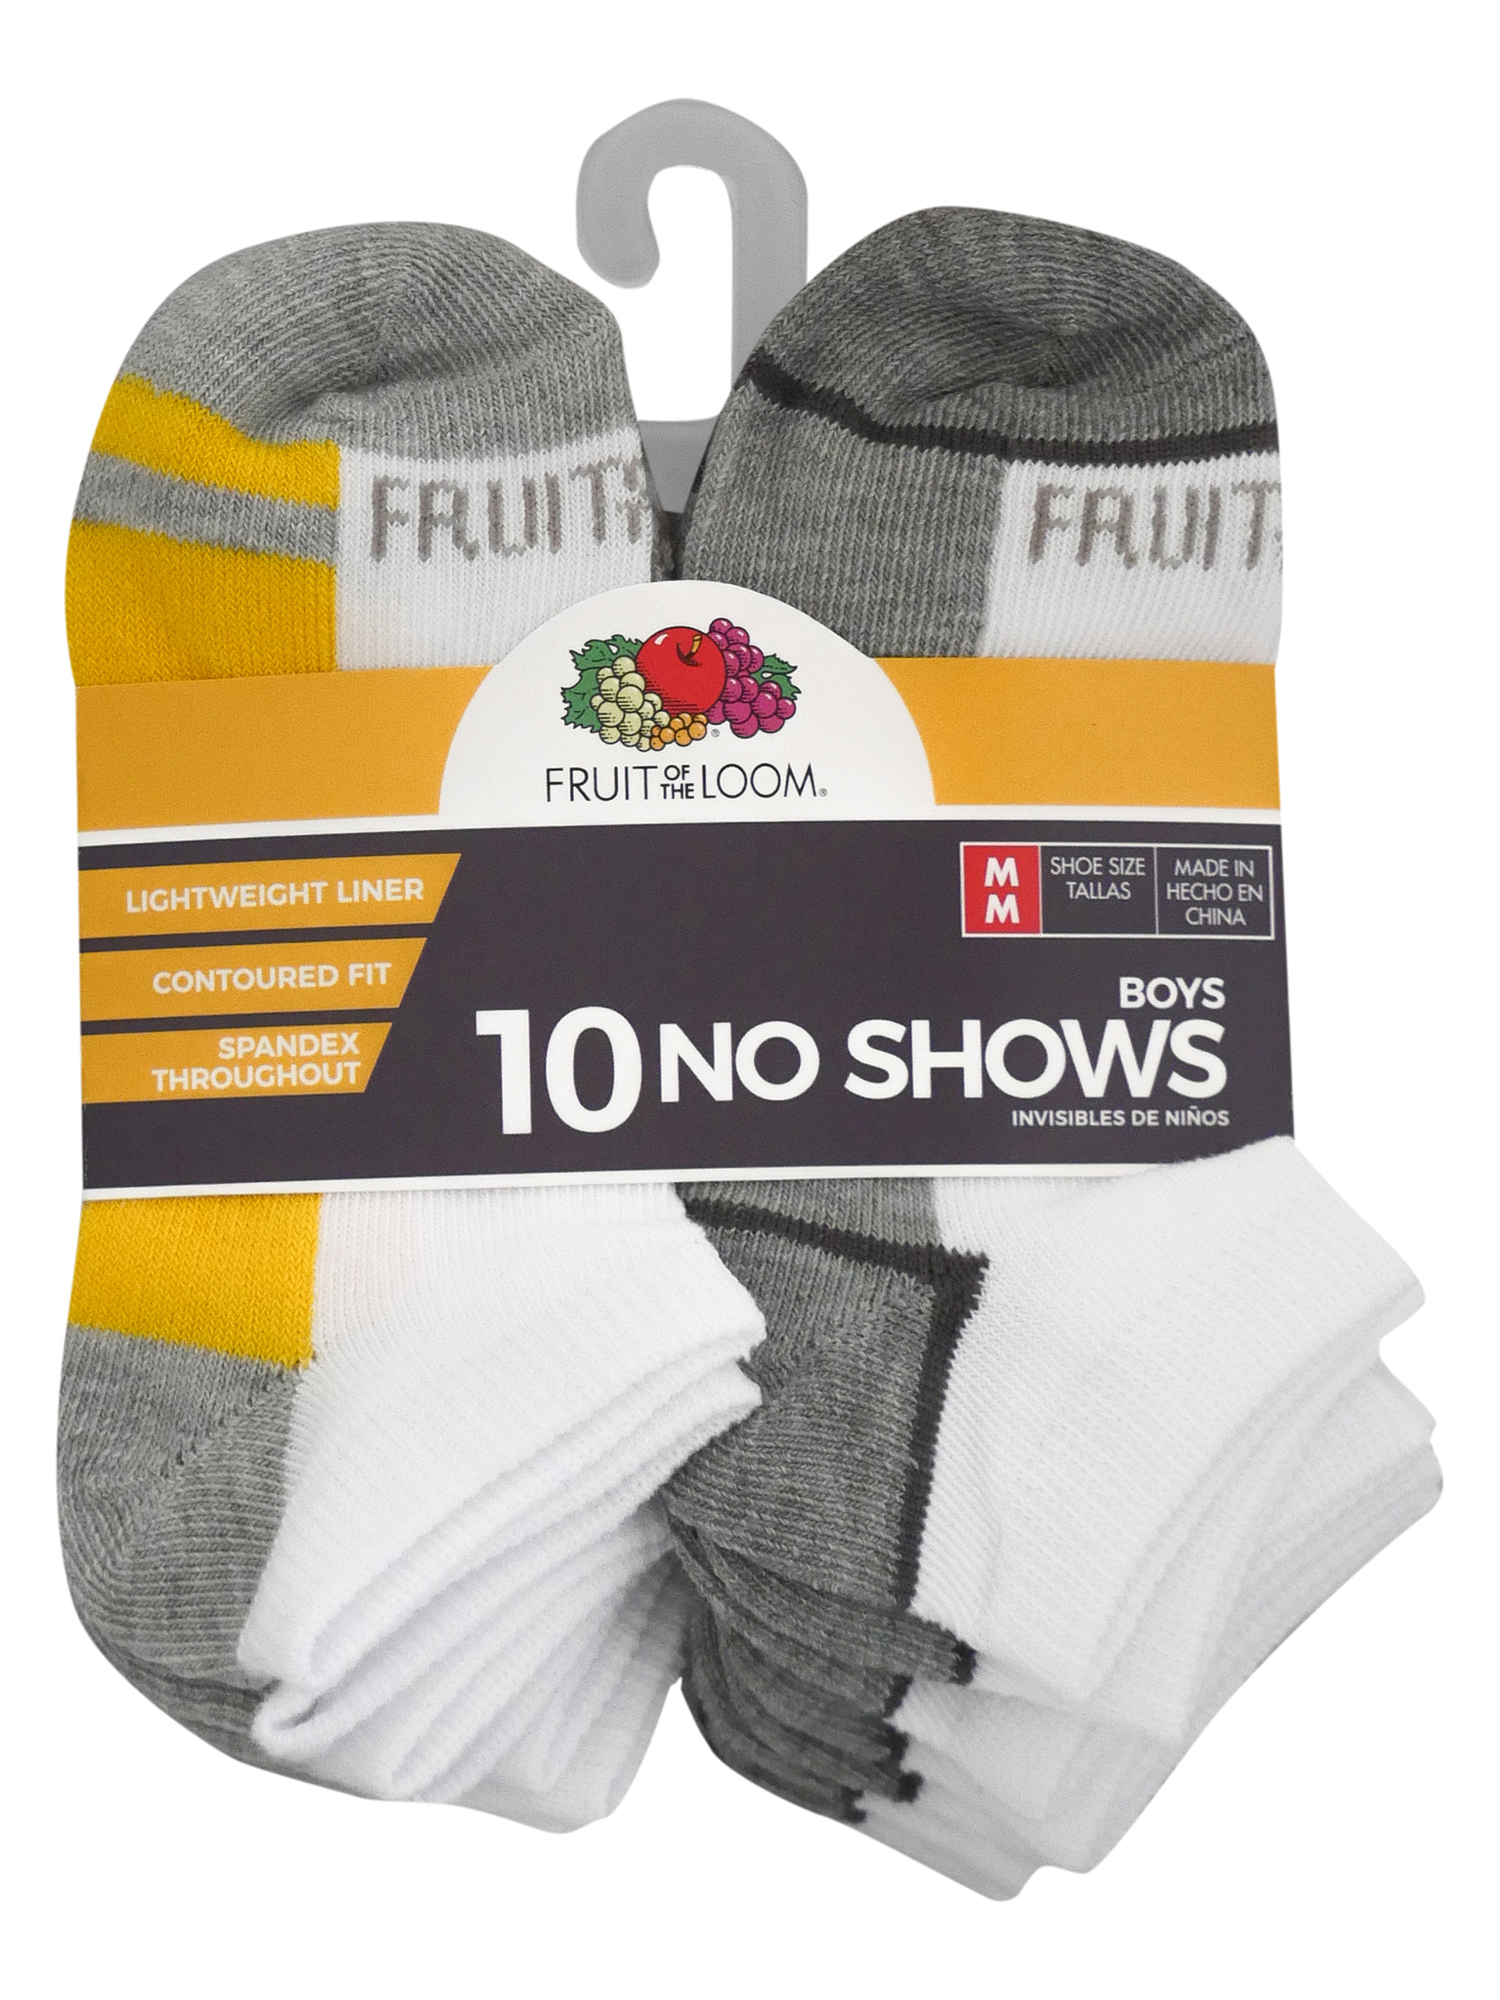 Fruit of the Loom No-Show Durable Solid Striped Socks (Big Boys or Little Boys) 10 Pack - image 2 of 5